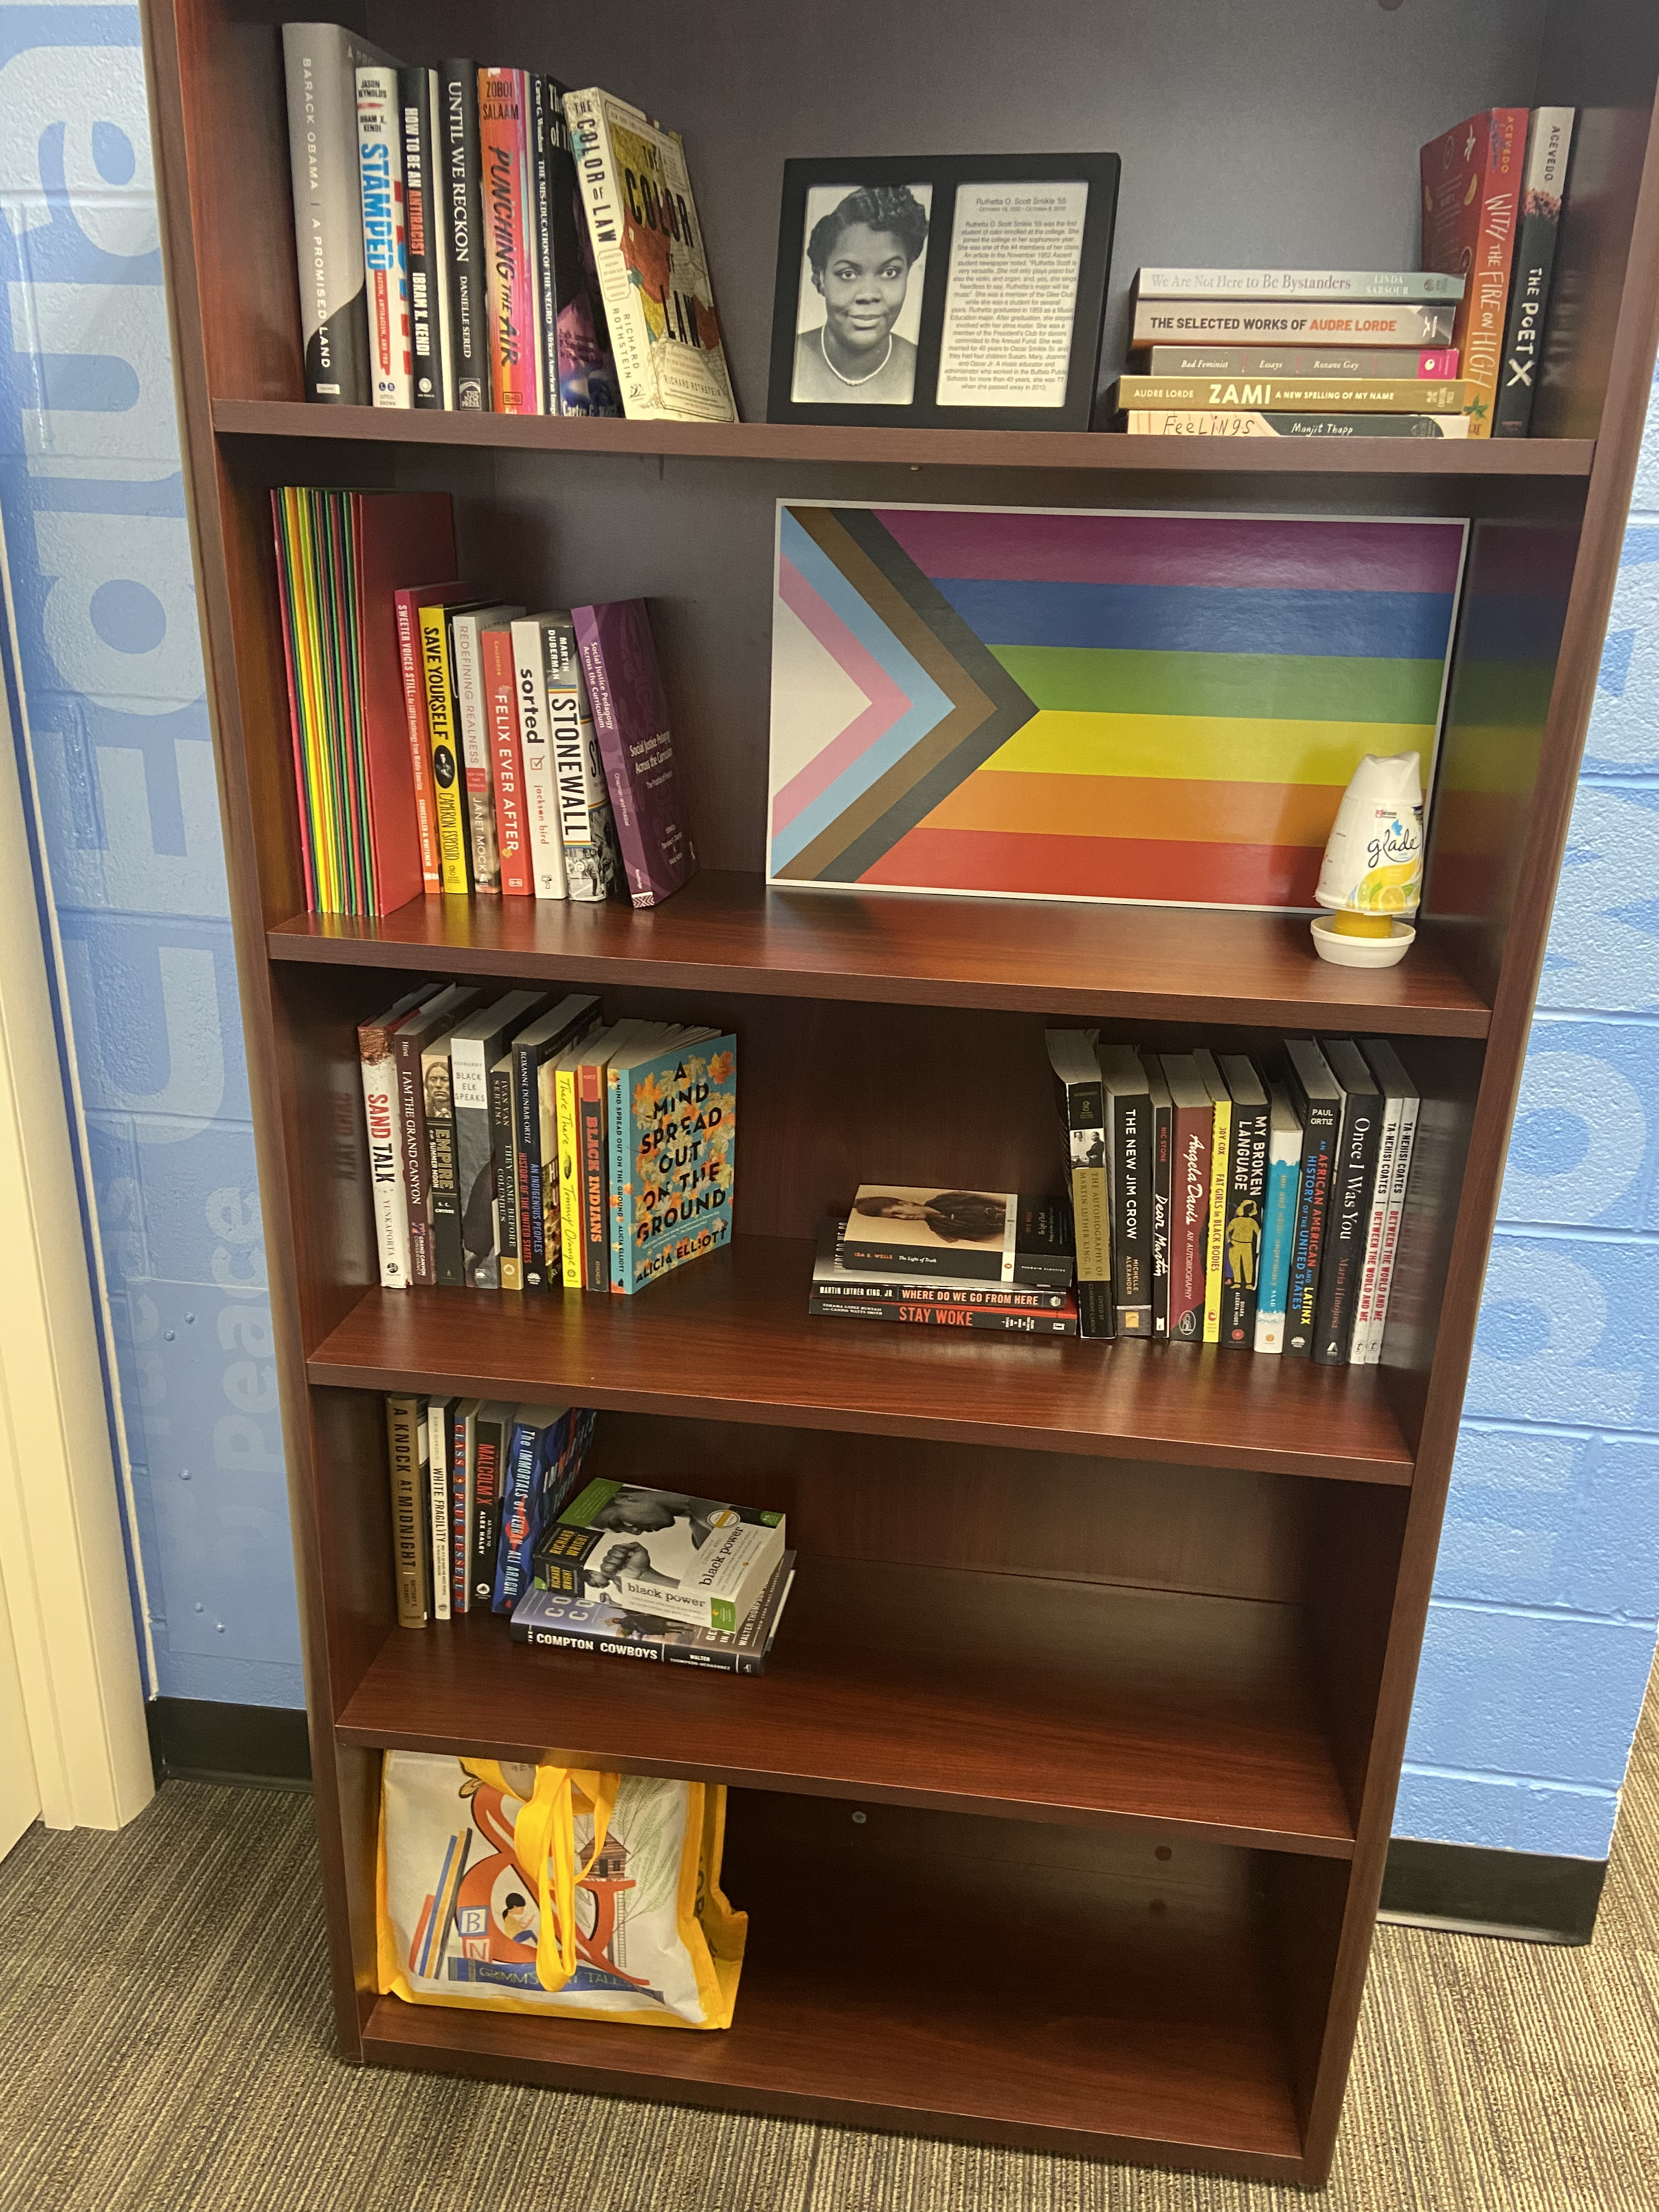 A bookshelf with several books and an LGBTQ+ flag.